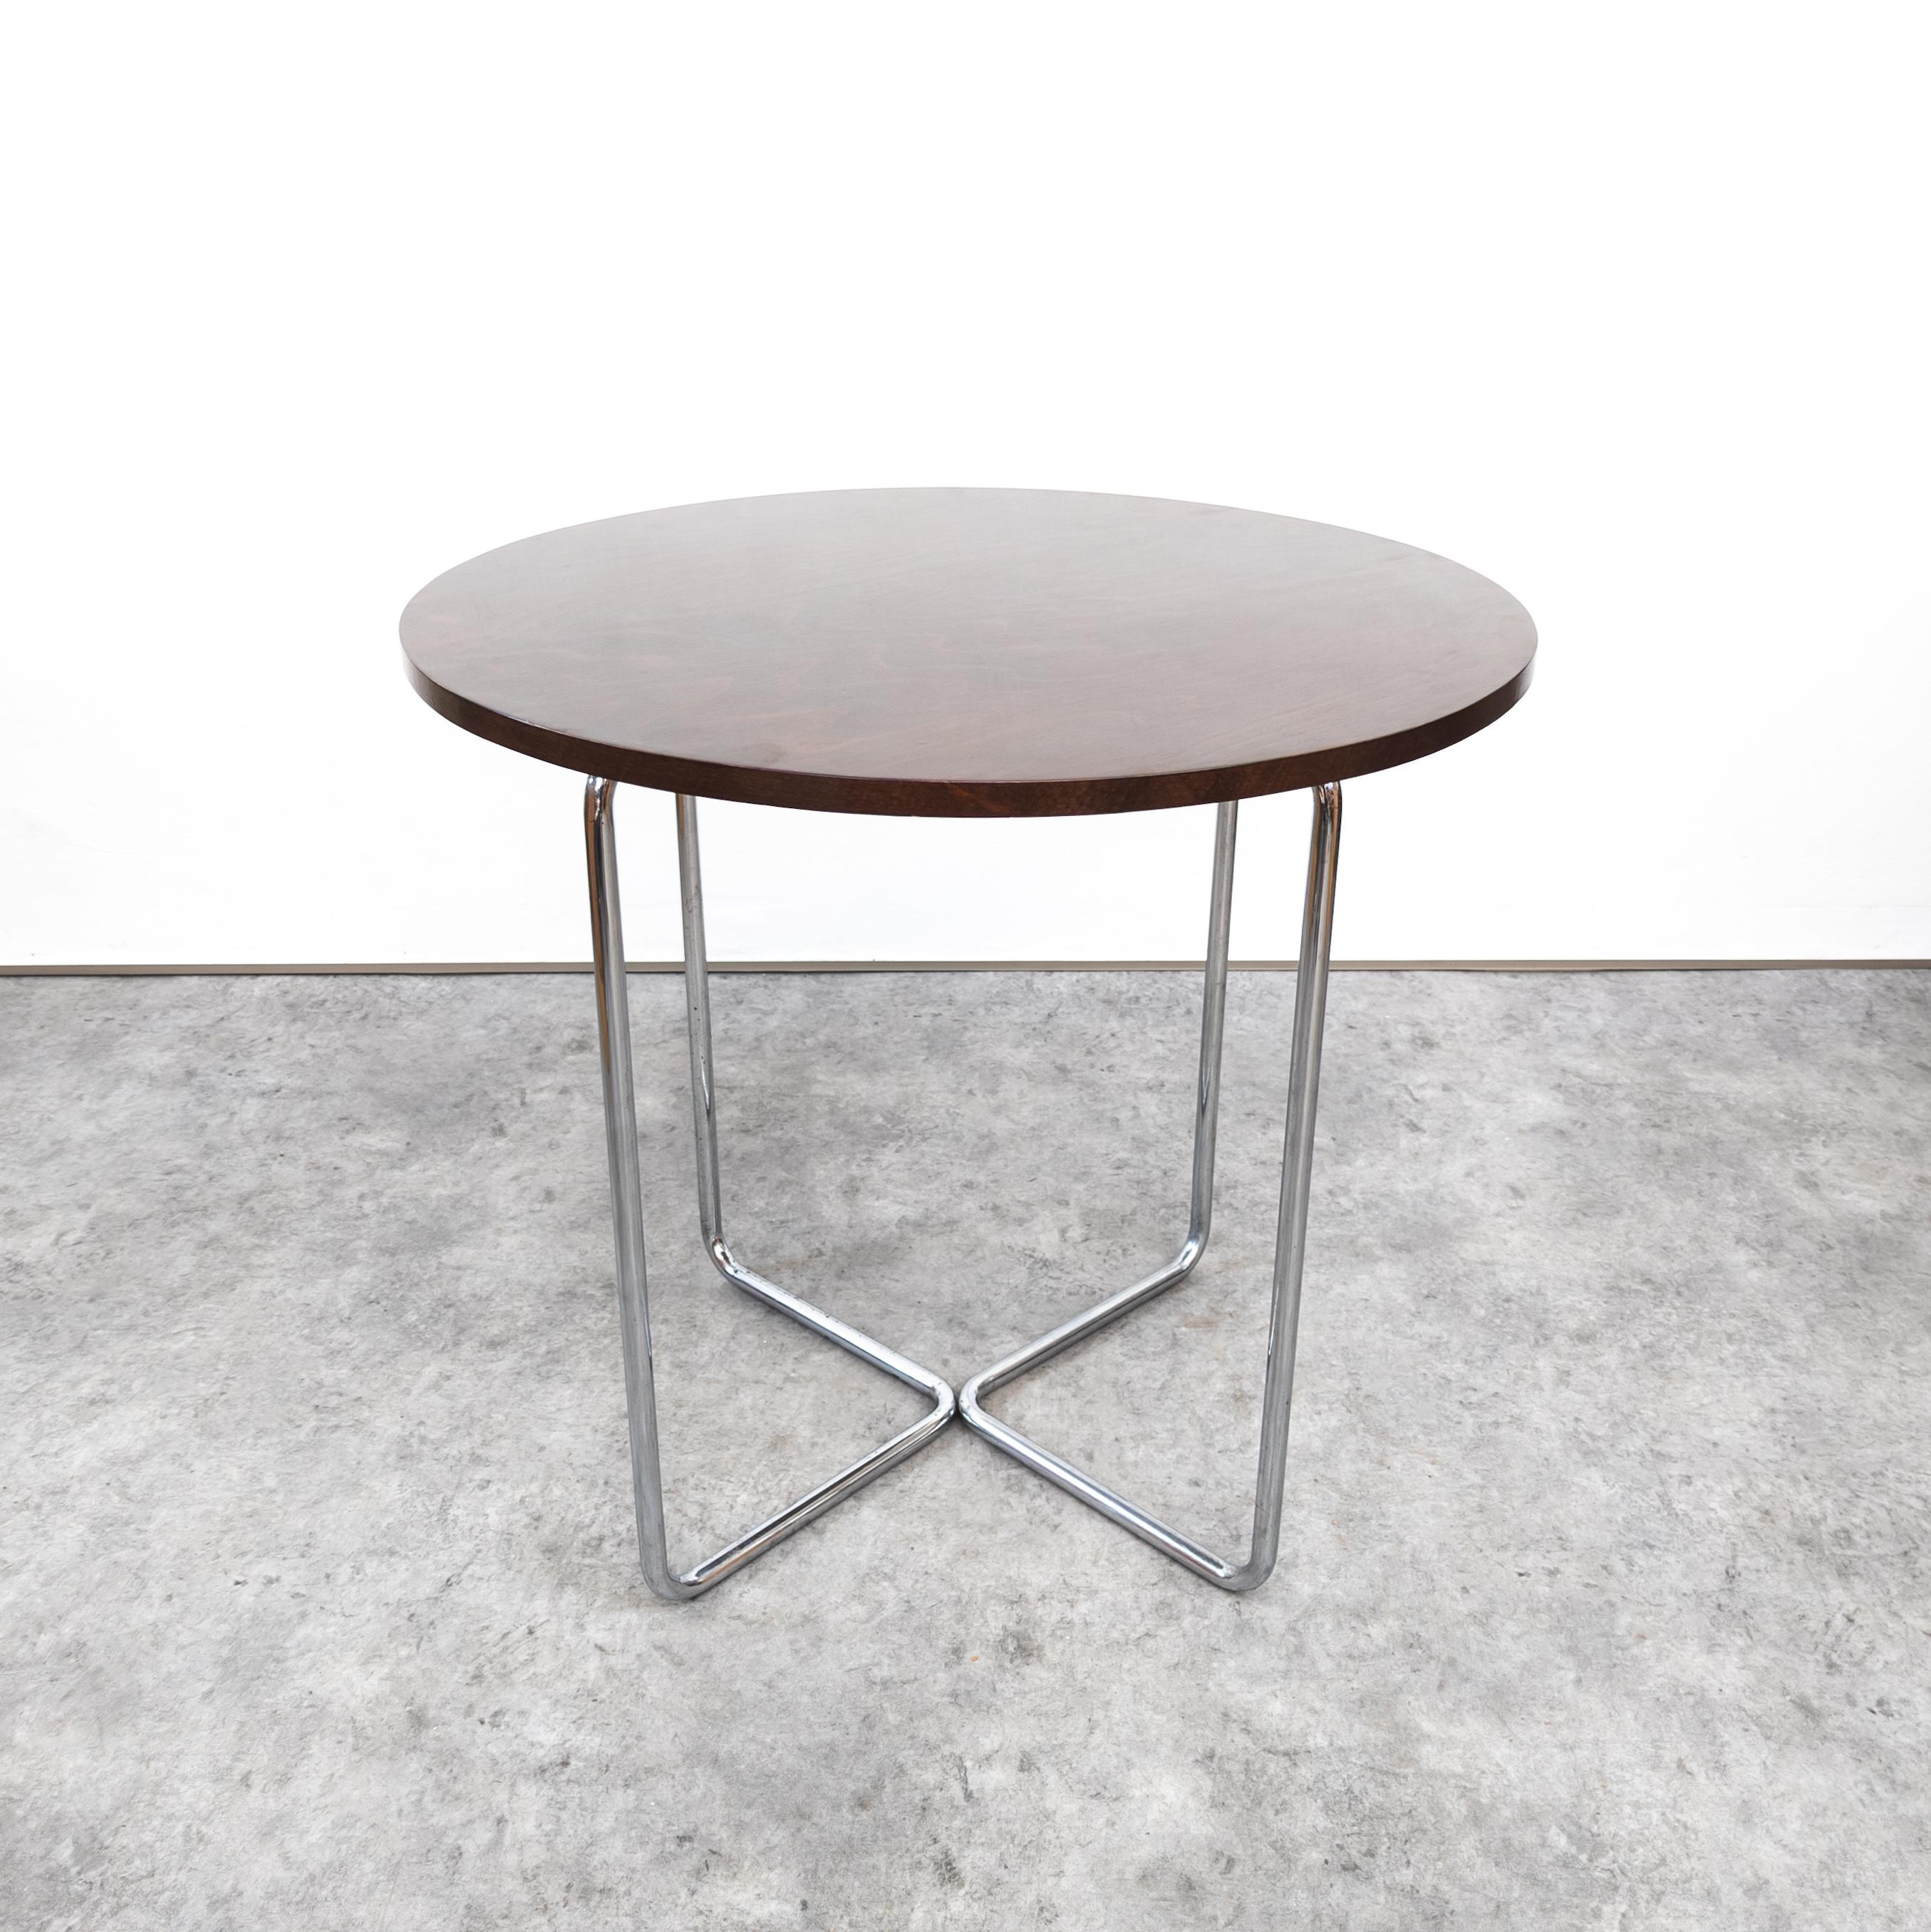 Designed in 1927 by Marcel Breuer for Thonet. Manufactured by Slezák company under Thonet license in Czechoslovakia, 1930's. This version has different dimensions than Thonet and thanks to its size can be used as a dining table. Chrome in very good